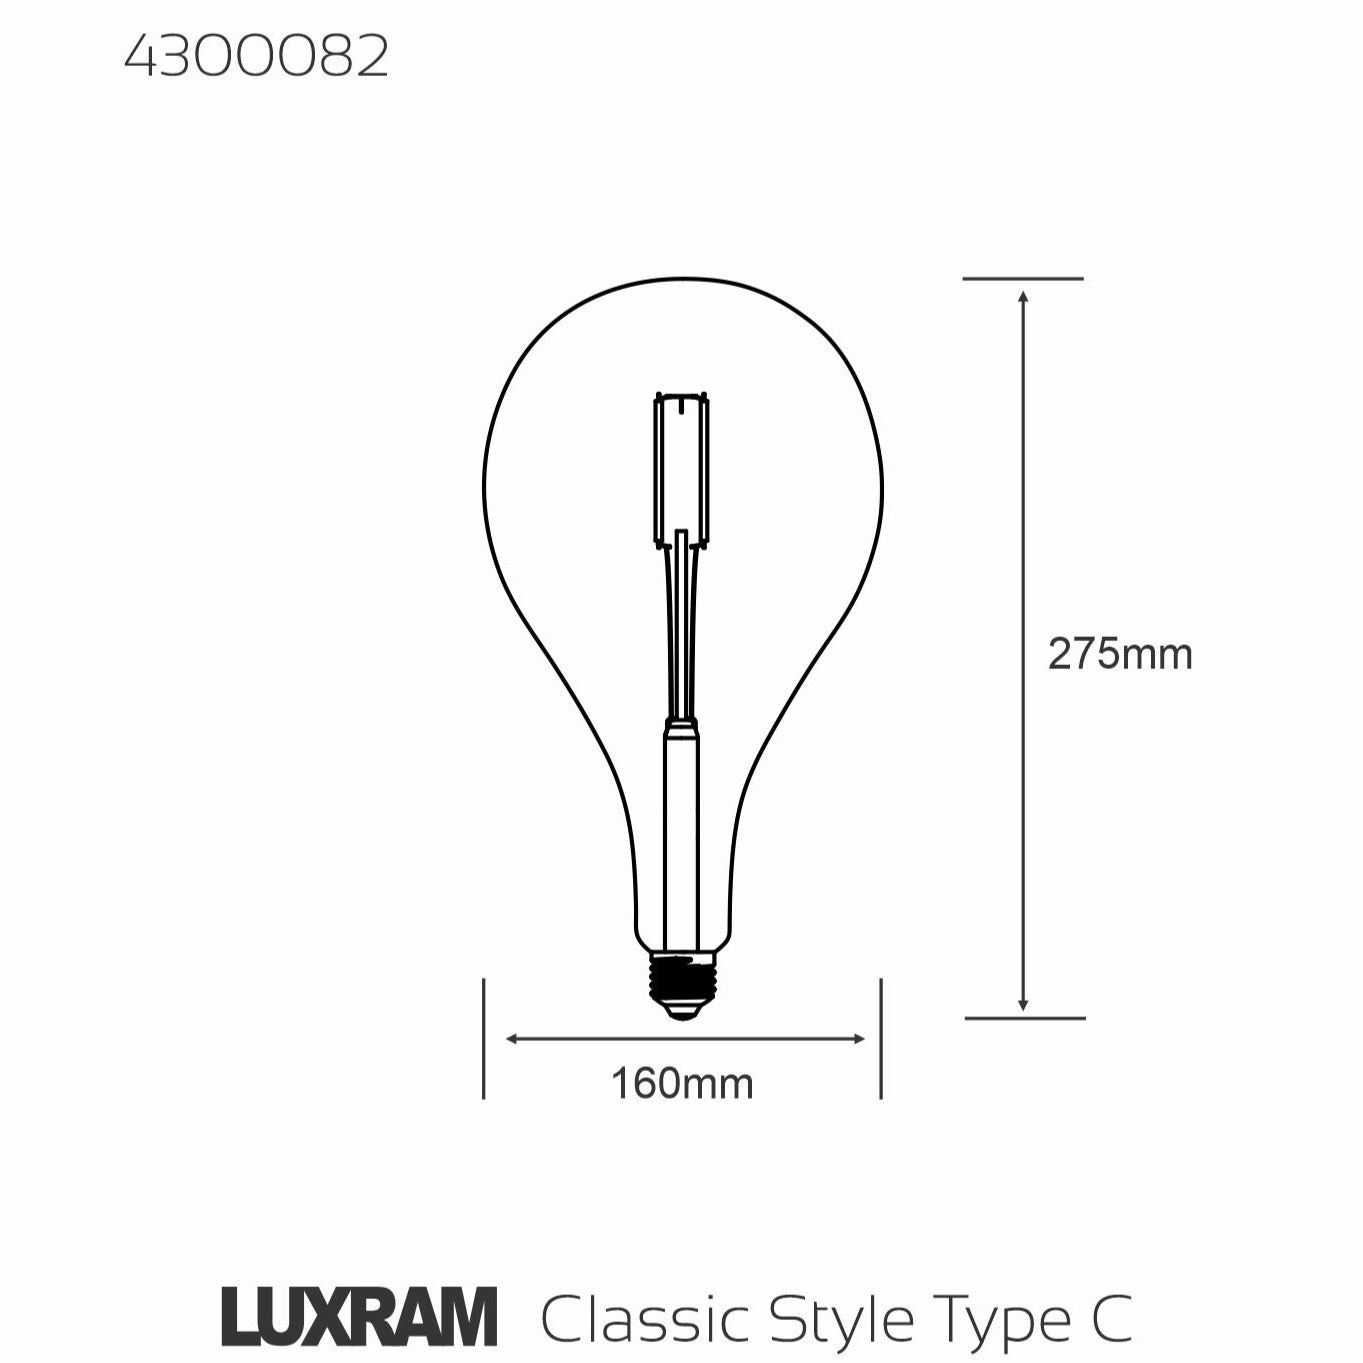 Classic Style LED Type C E27 Dimmable 220-240V 4W 2100K, 200lm, Amber Finish, 3yrs Warranty (3LT520M)